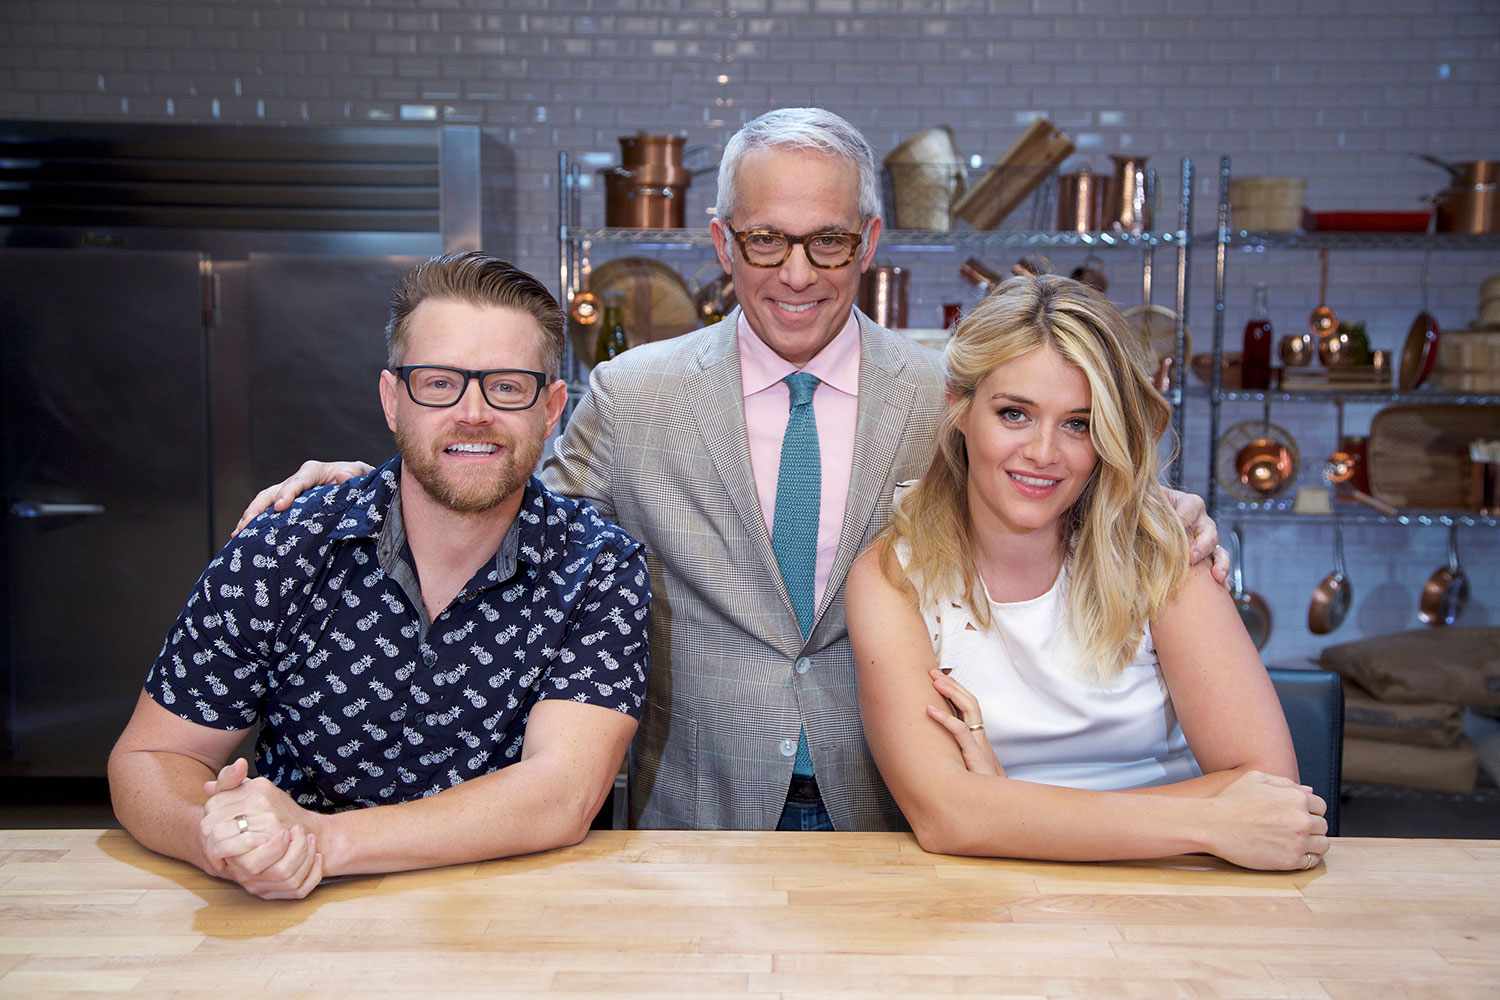 Judge Richard Blaise, Host Geoffrey Zakarian, and Judge Daphne Oz pose on set, as seen on Food Network's Cooks vs. Cons